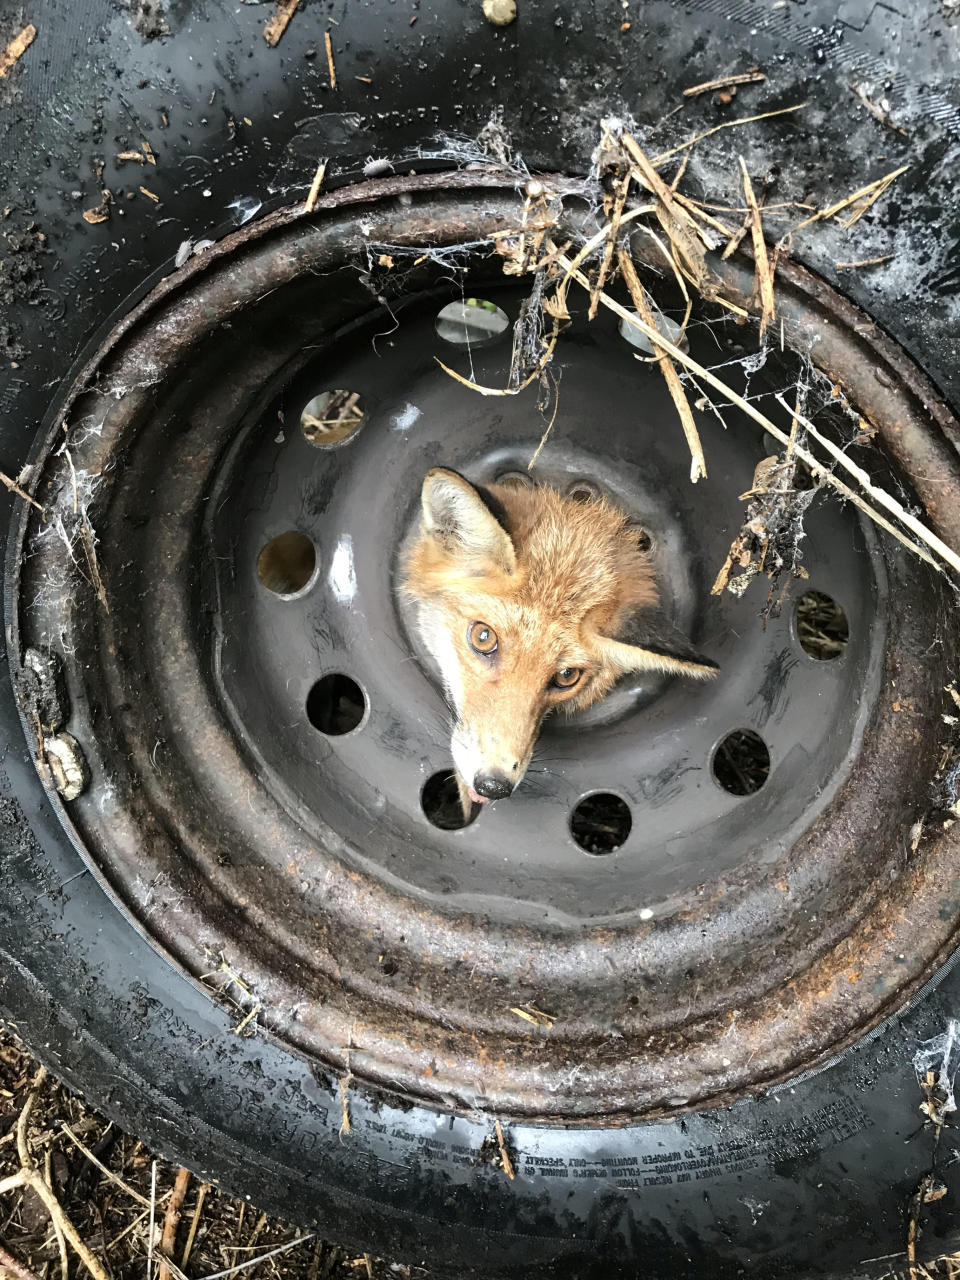 Storage centre workers in Bristol found a fox with his head stuck in the middle of an old tyre in October.